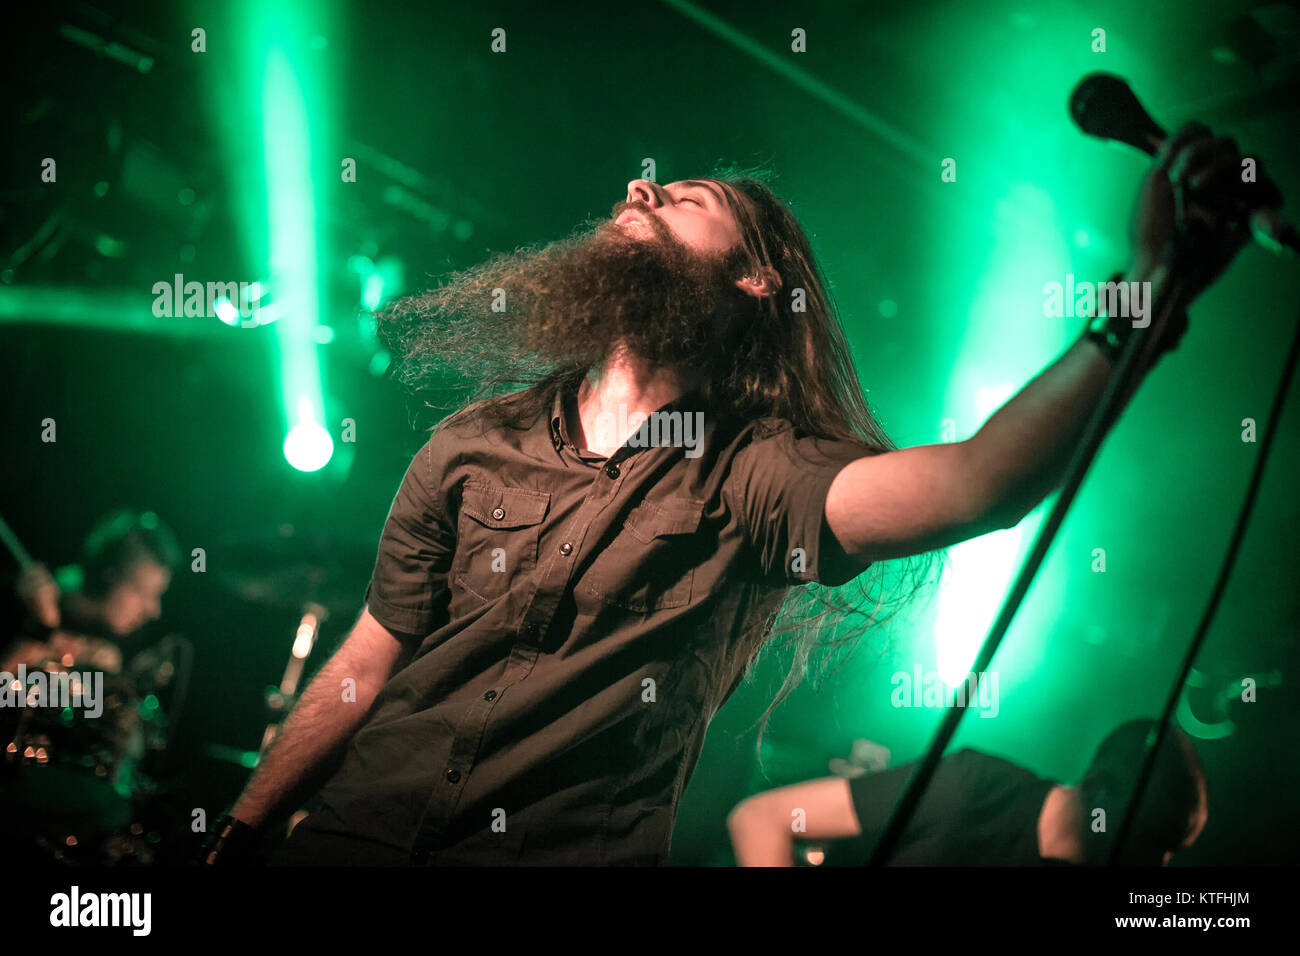 The Italian doom metal band Shores of Null performs a live concert at John Dee as part of the festival Inferno Metal Festival 2016 in Oslo. Here vocalist Davide Straccione is seen live on stage. Norway, 24/03 2016. Stock Photo